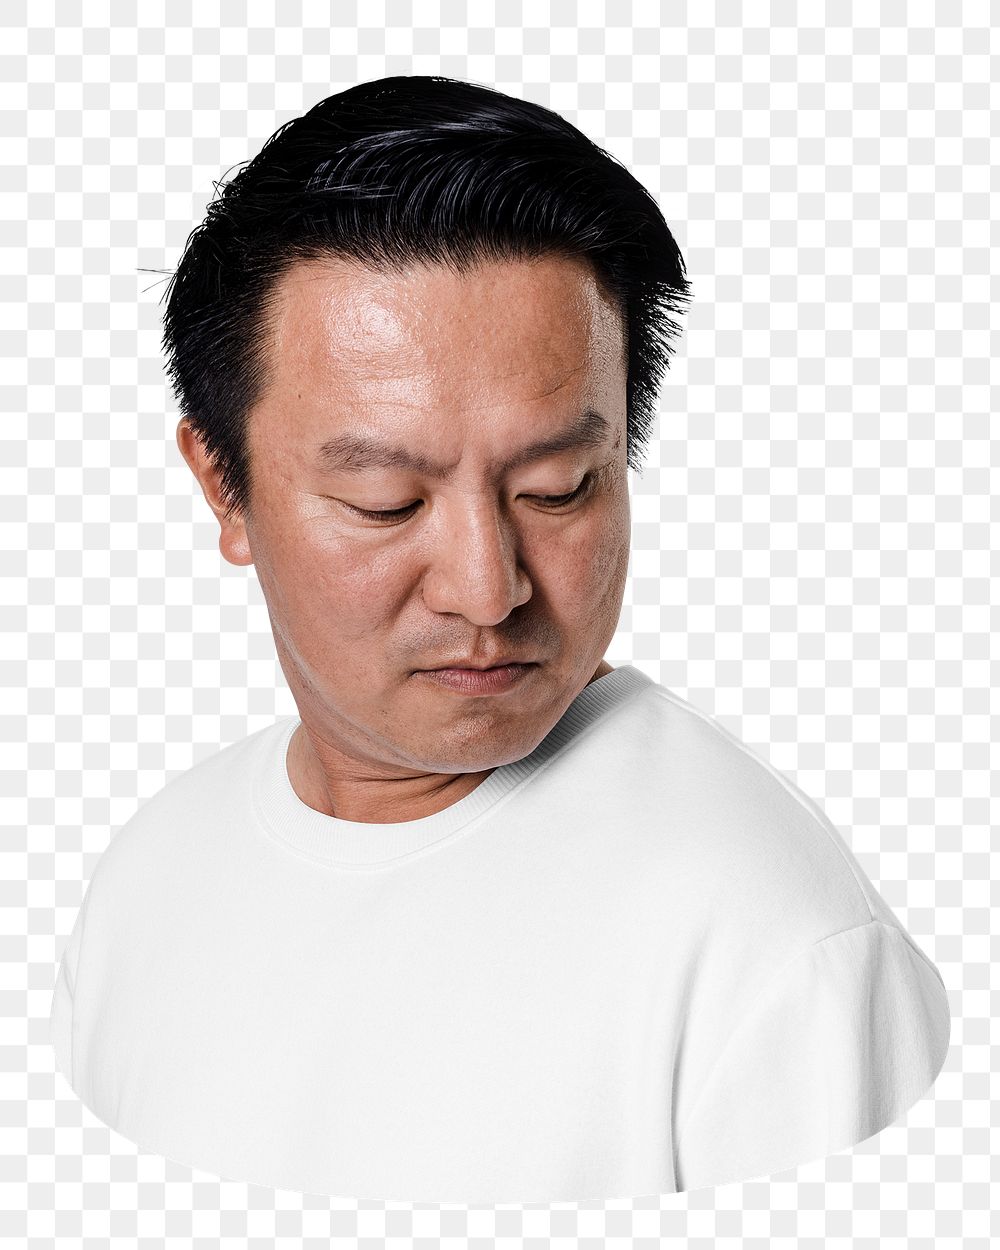 Png white sweater, Asian male model, front view, transparent background